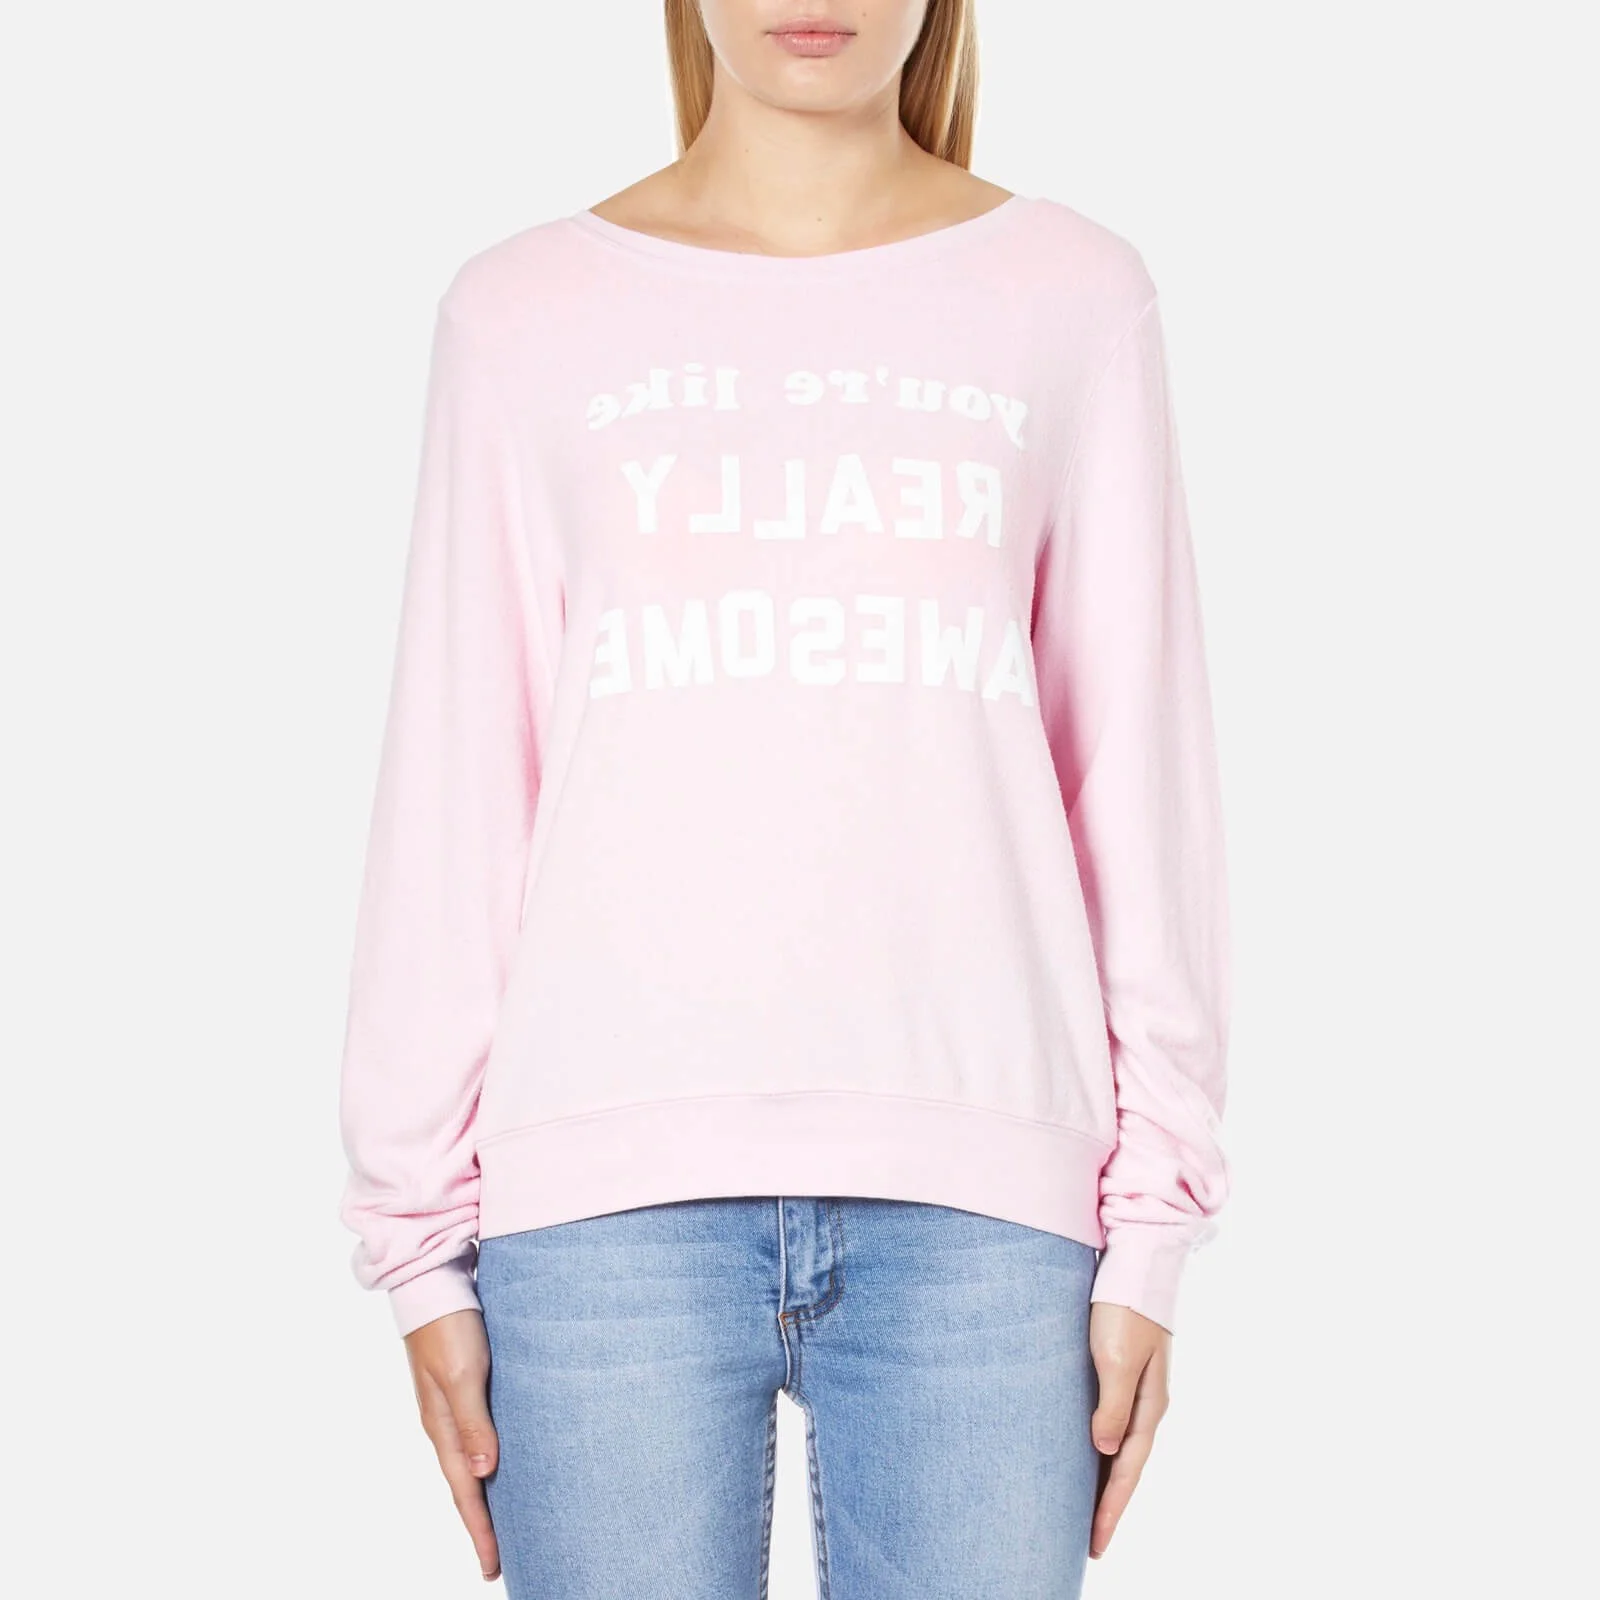 Wildfox Women's Really Awesome Baggy Beach Sweatshirt - Pouty Pink Image 1